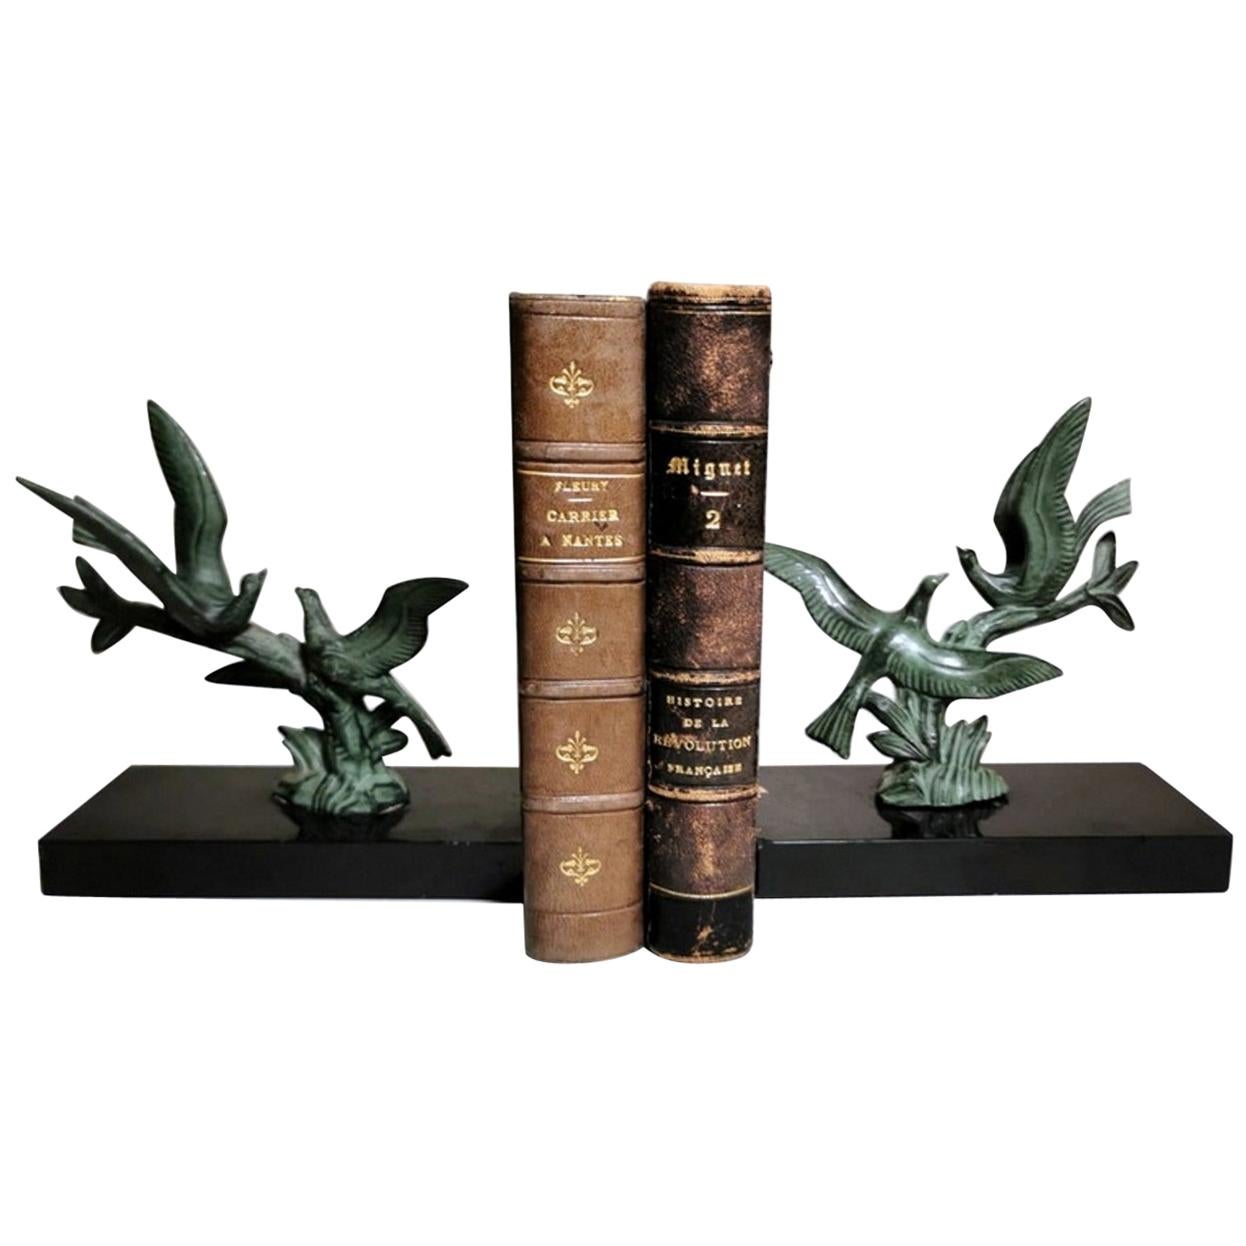 Art Deco Pair of Bookends with Metal Birds and Marble Marquinia, 1925